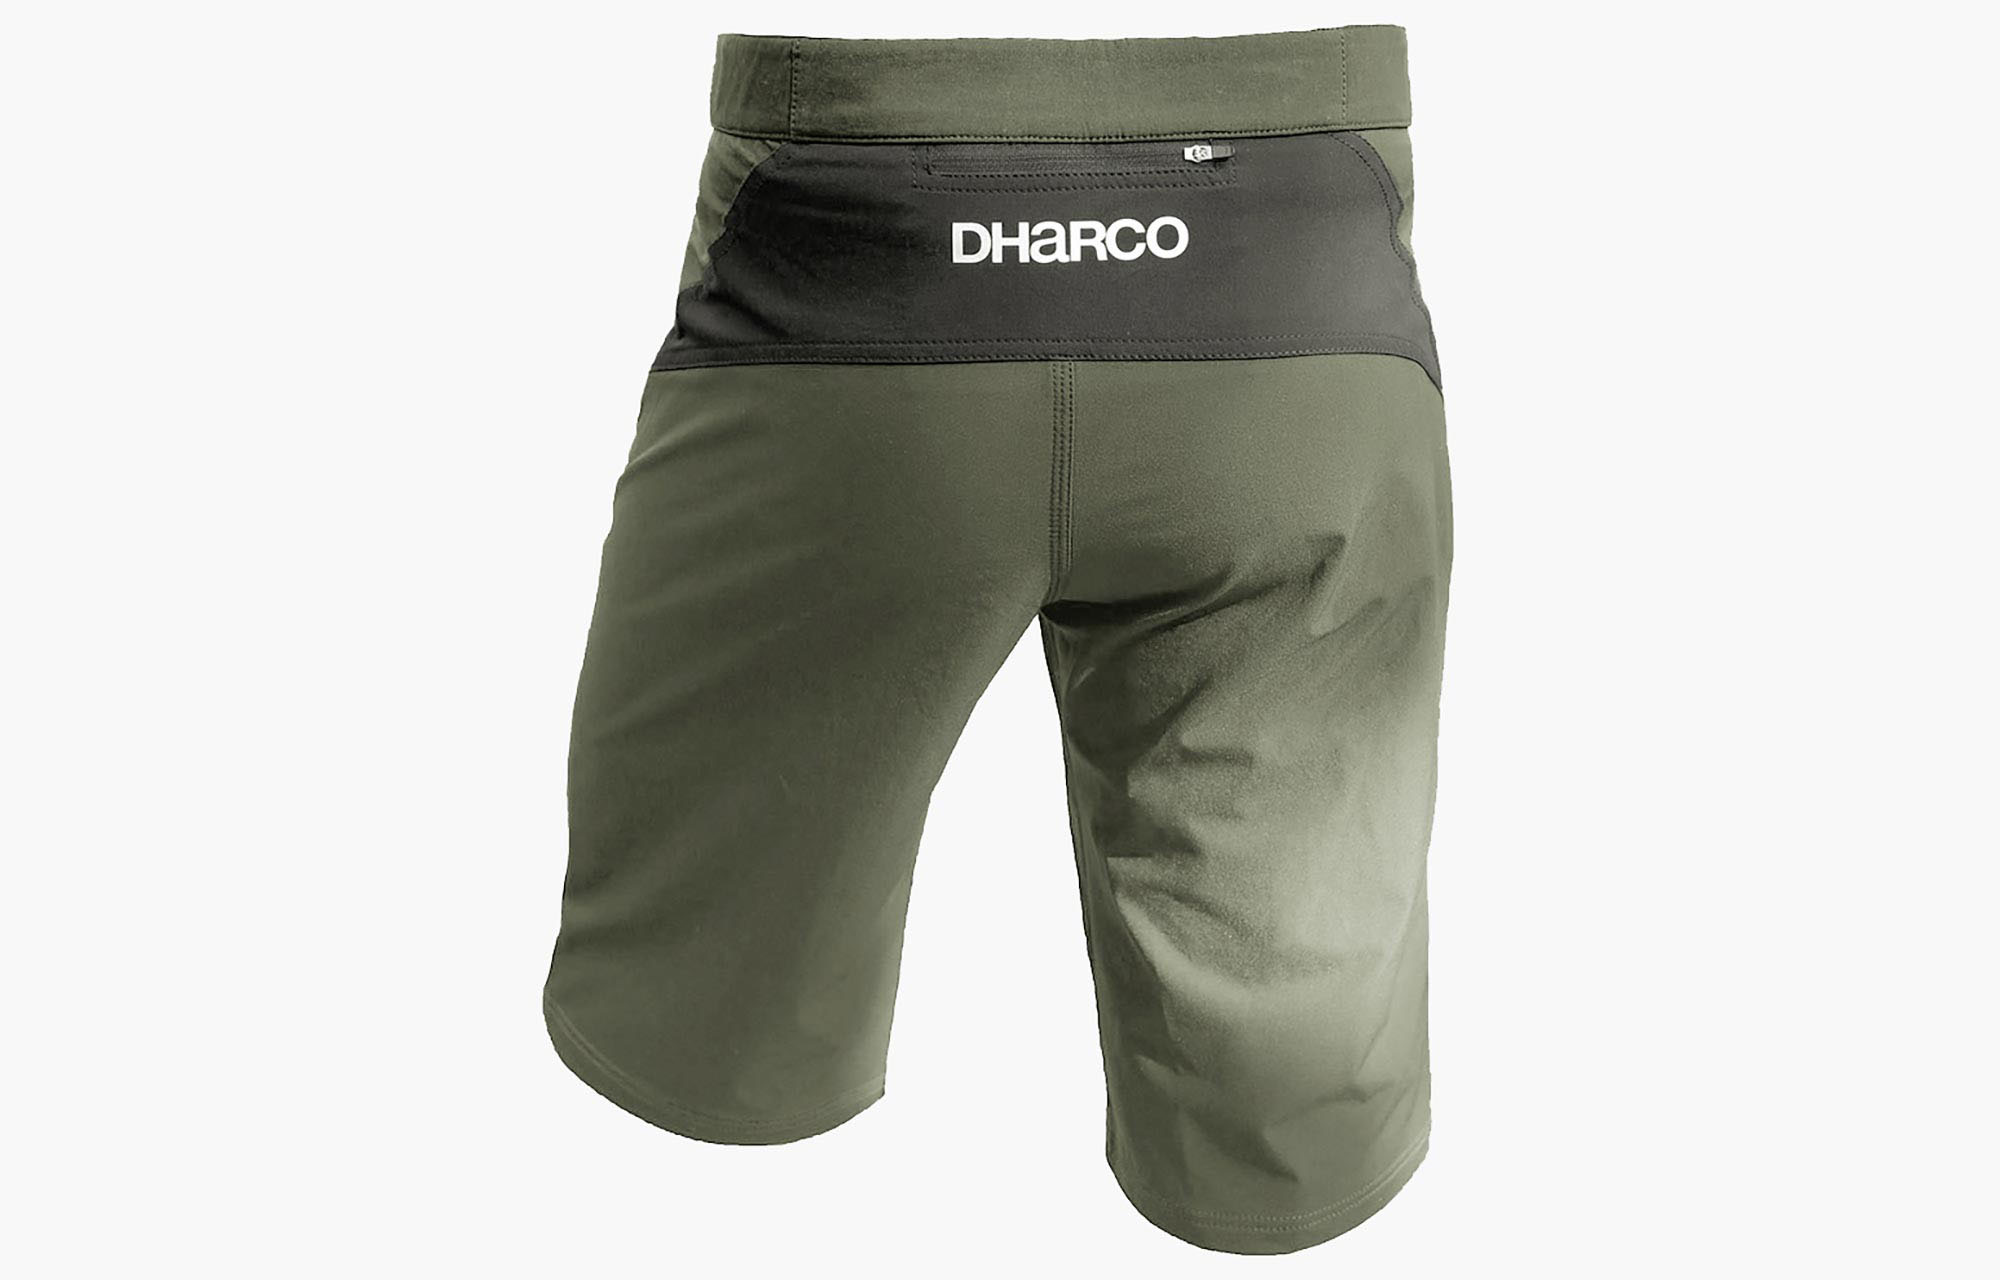 DHARCO SHORTS CAMO image number 0